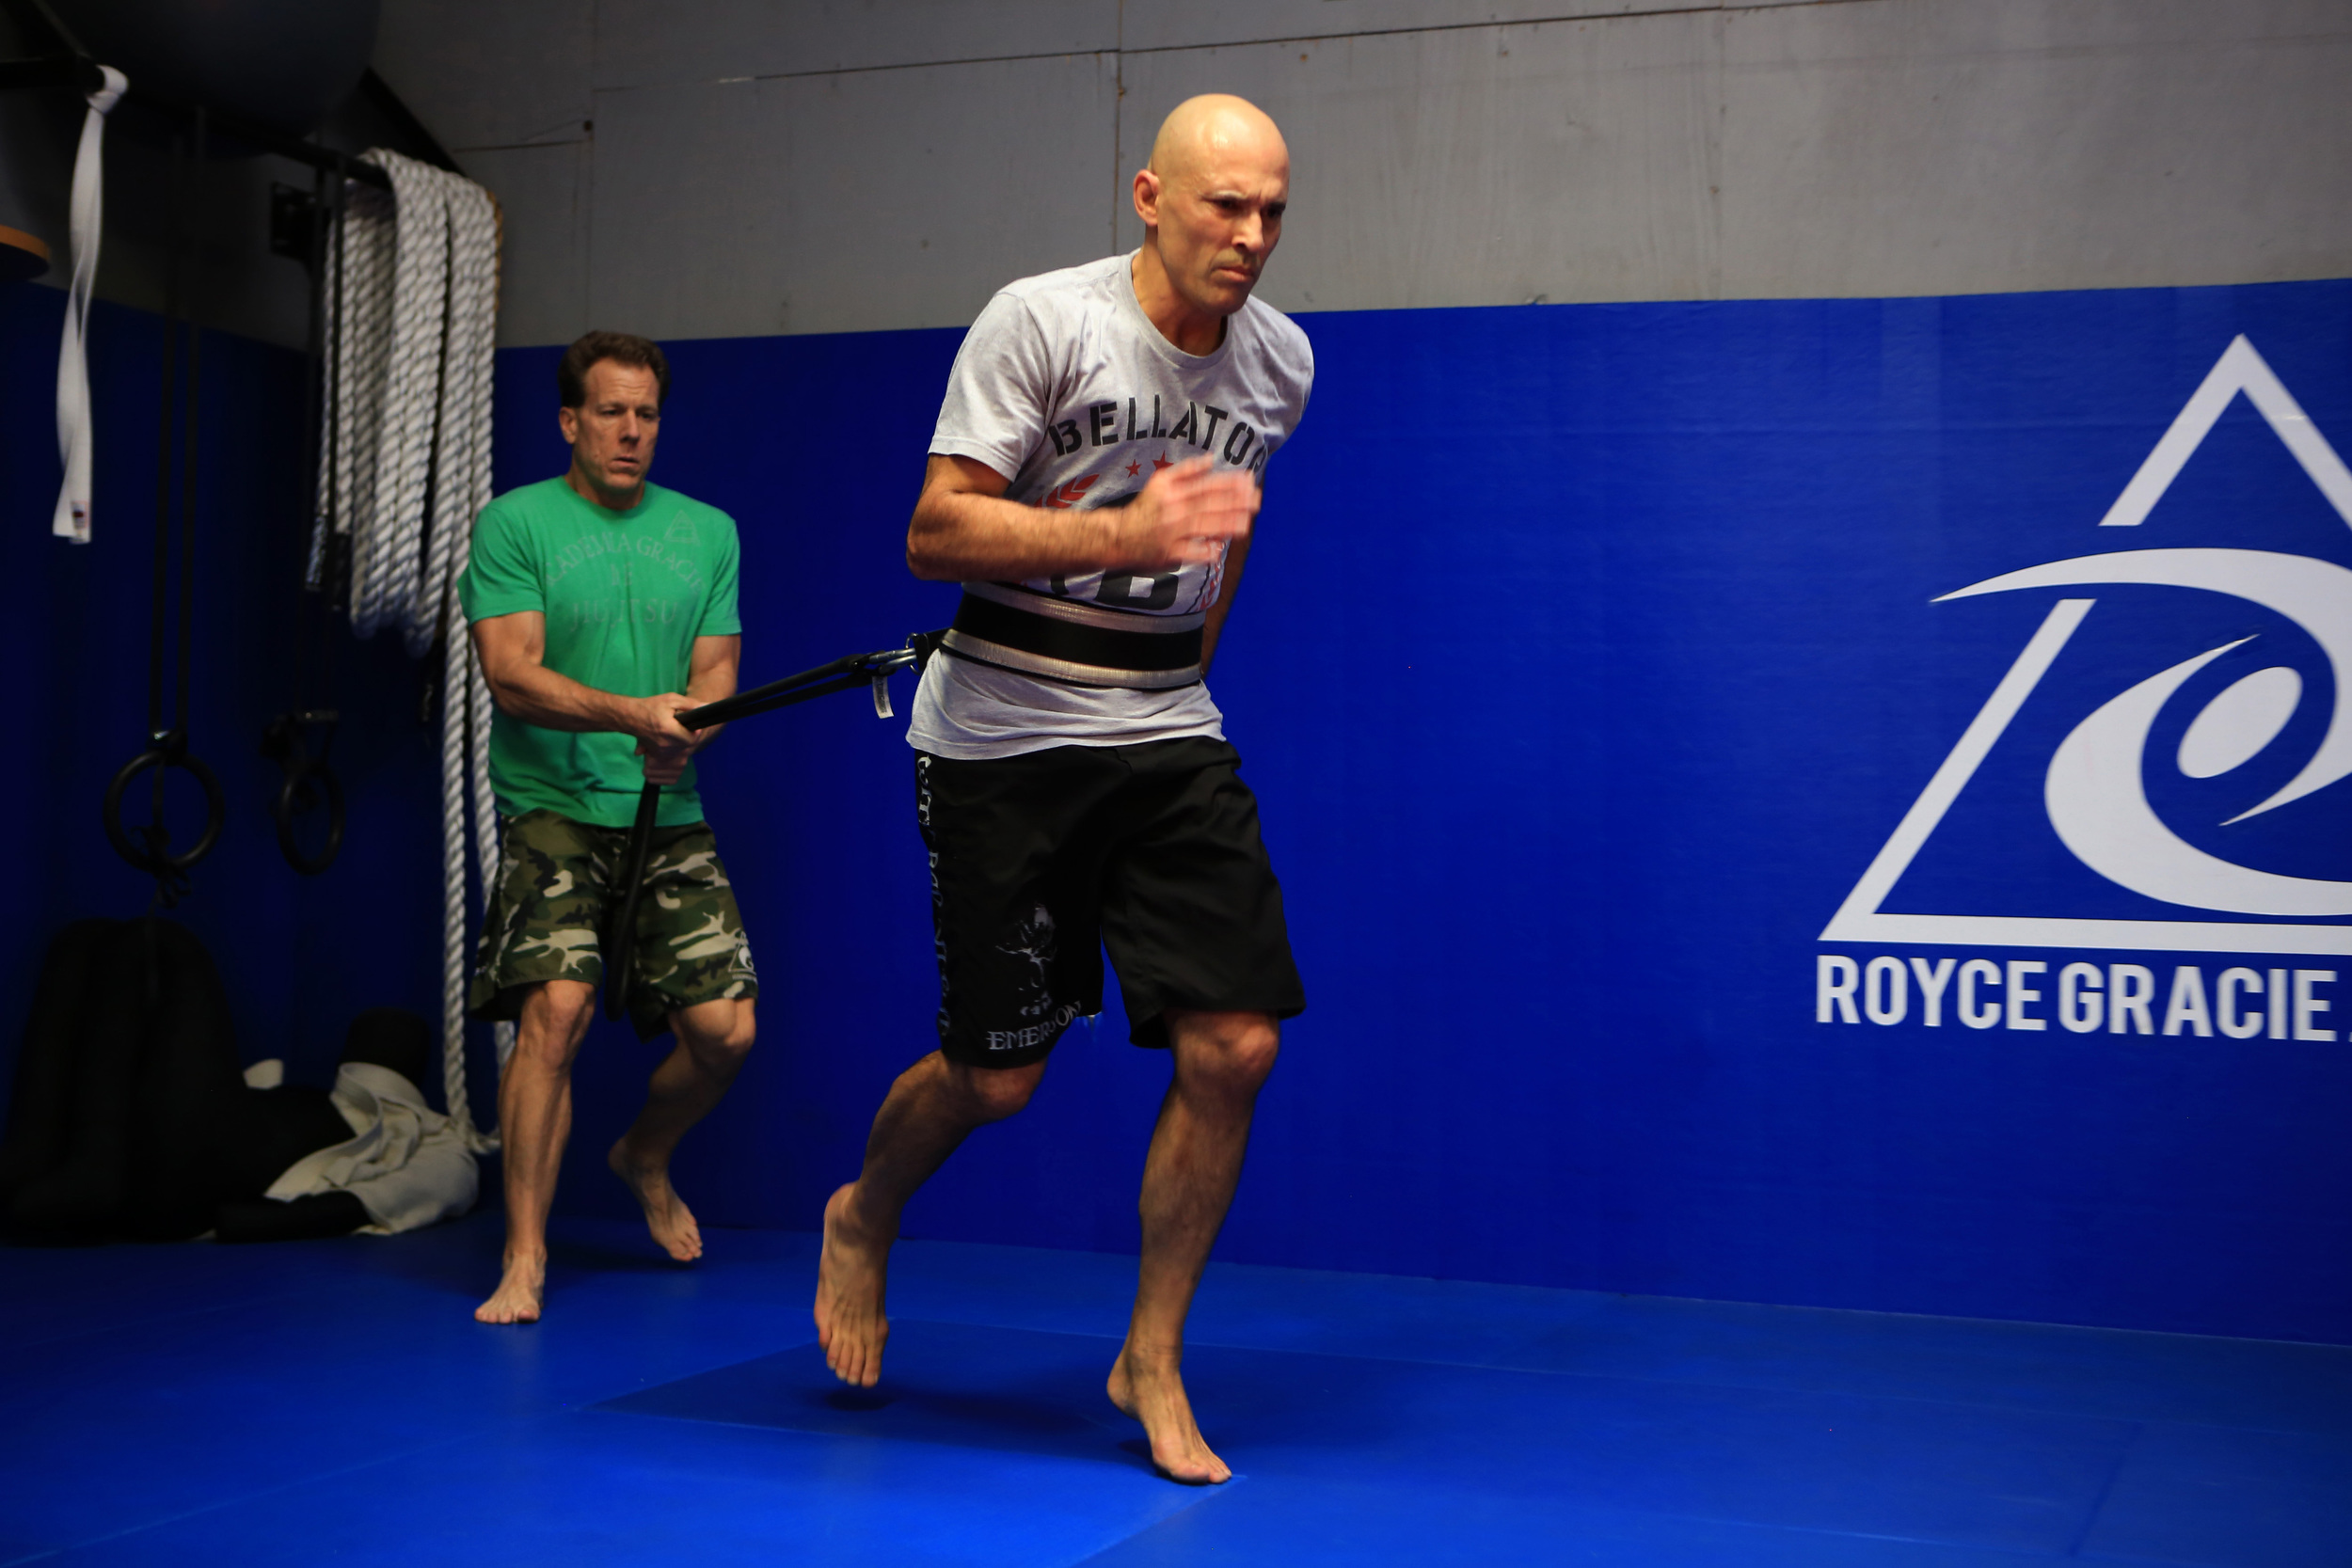  Gracie, right, UFC legend, trains with Strom, left, former strength and conditioning coach for the USC Trojans and LA Rams, during a strenuous workout at the Royce Gracie Jiu-Jitsu Academy in Torrance, California. (©Gail Fisher for ESPN) 